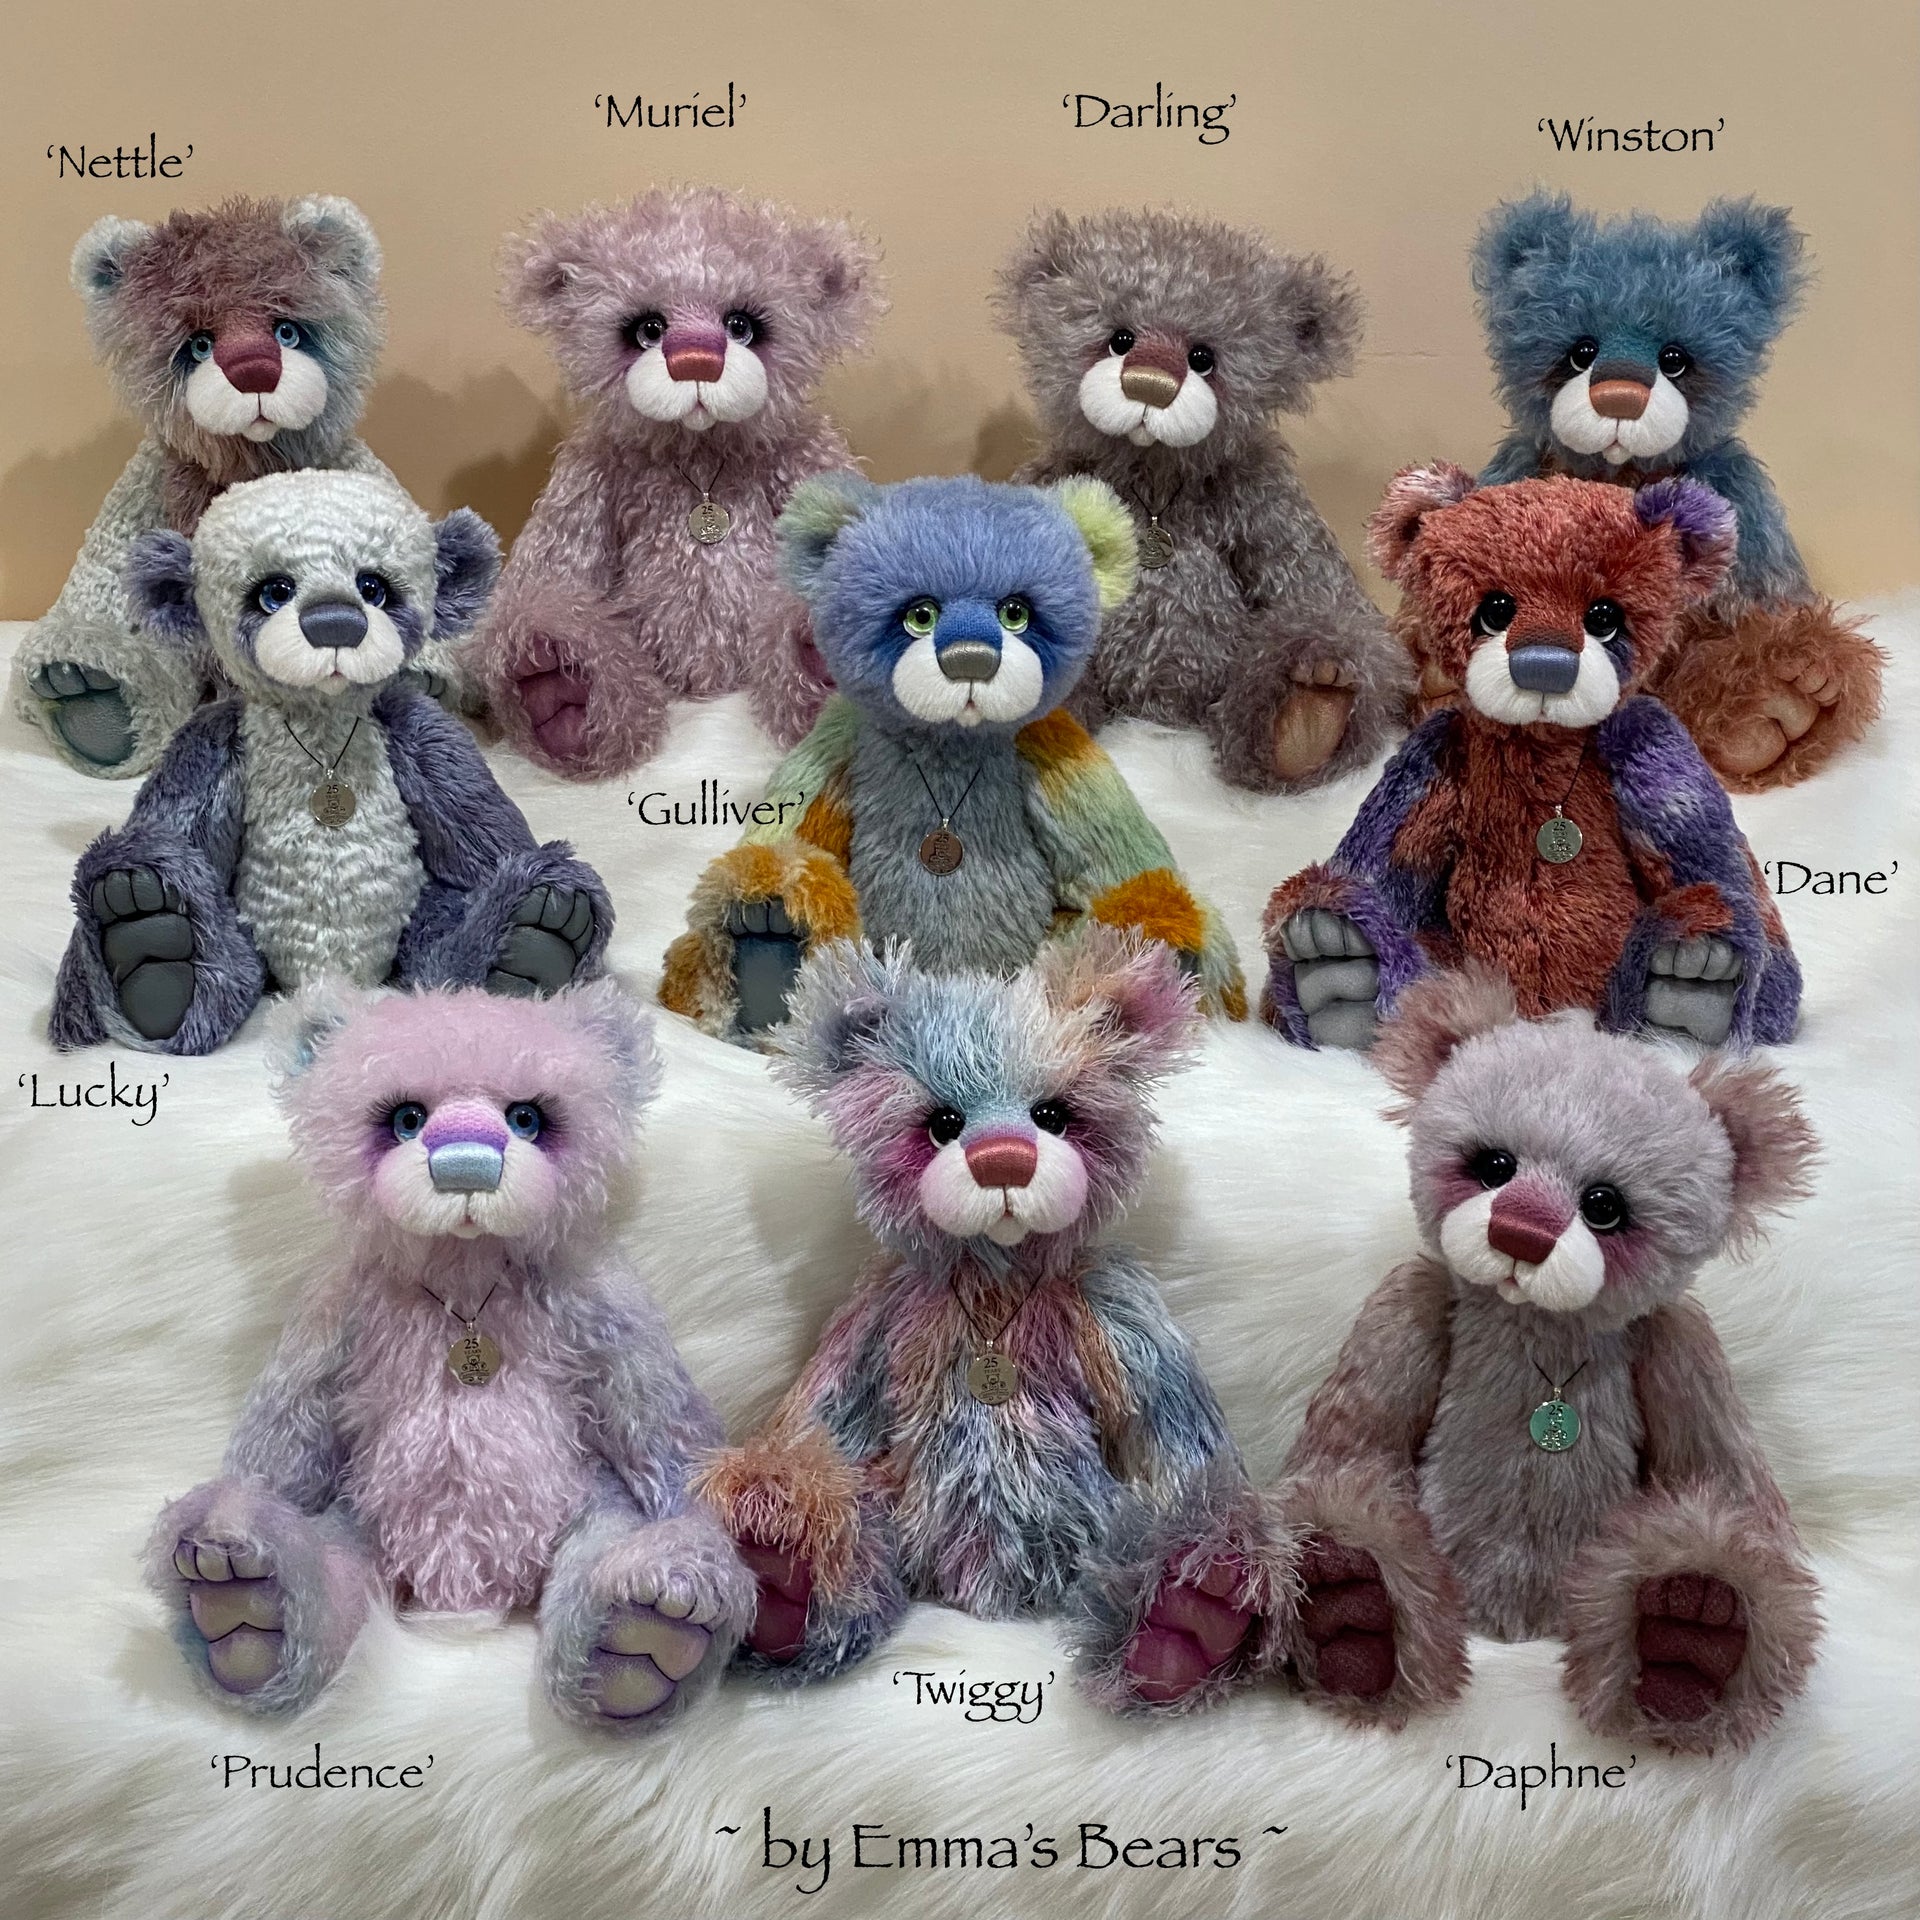 Twiggy - 16" SPECIAL 25th Anniversary Collection Hand-dyed mohair Artist Bear by Emmas Bears - OOAK